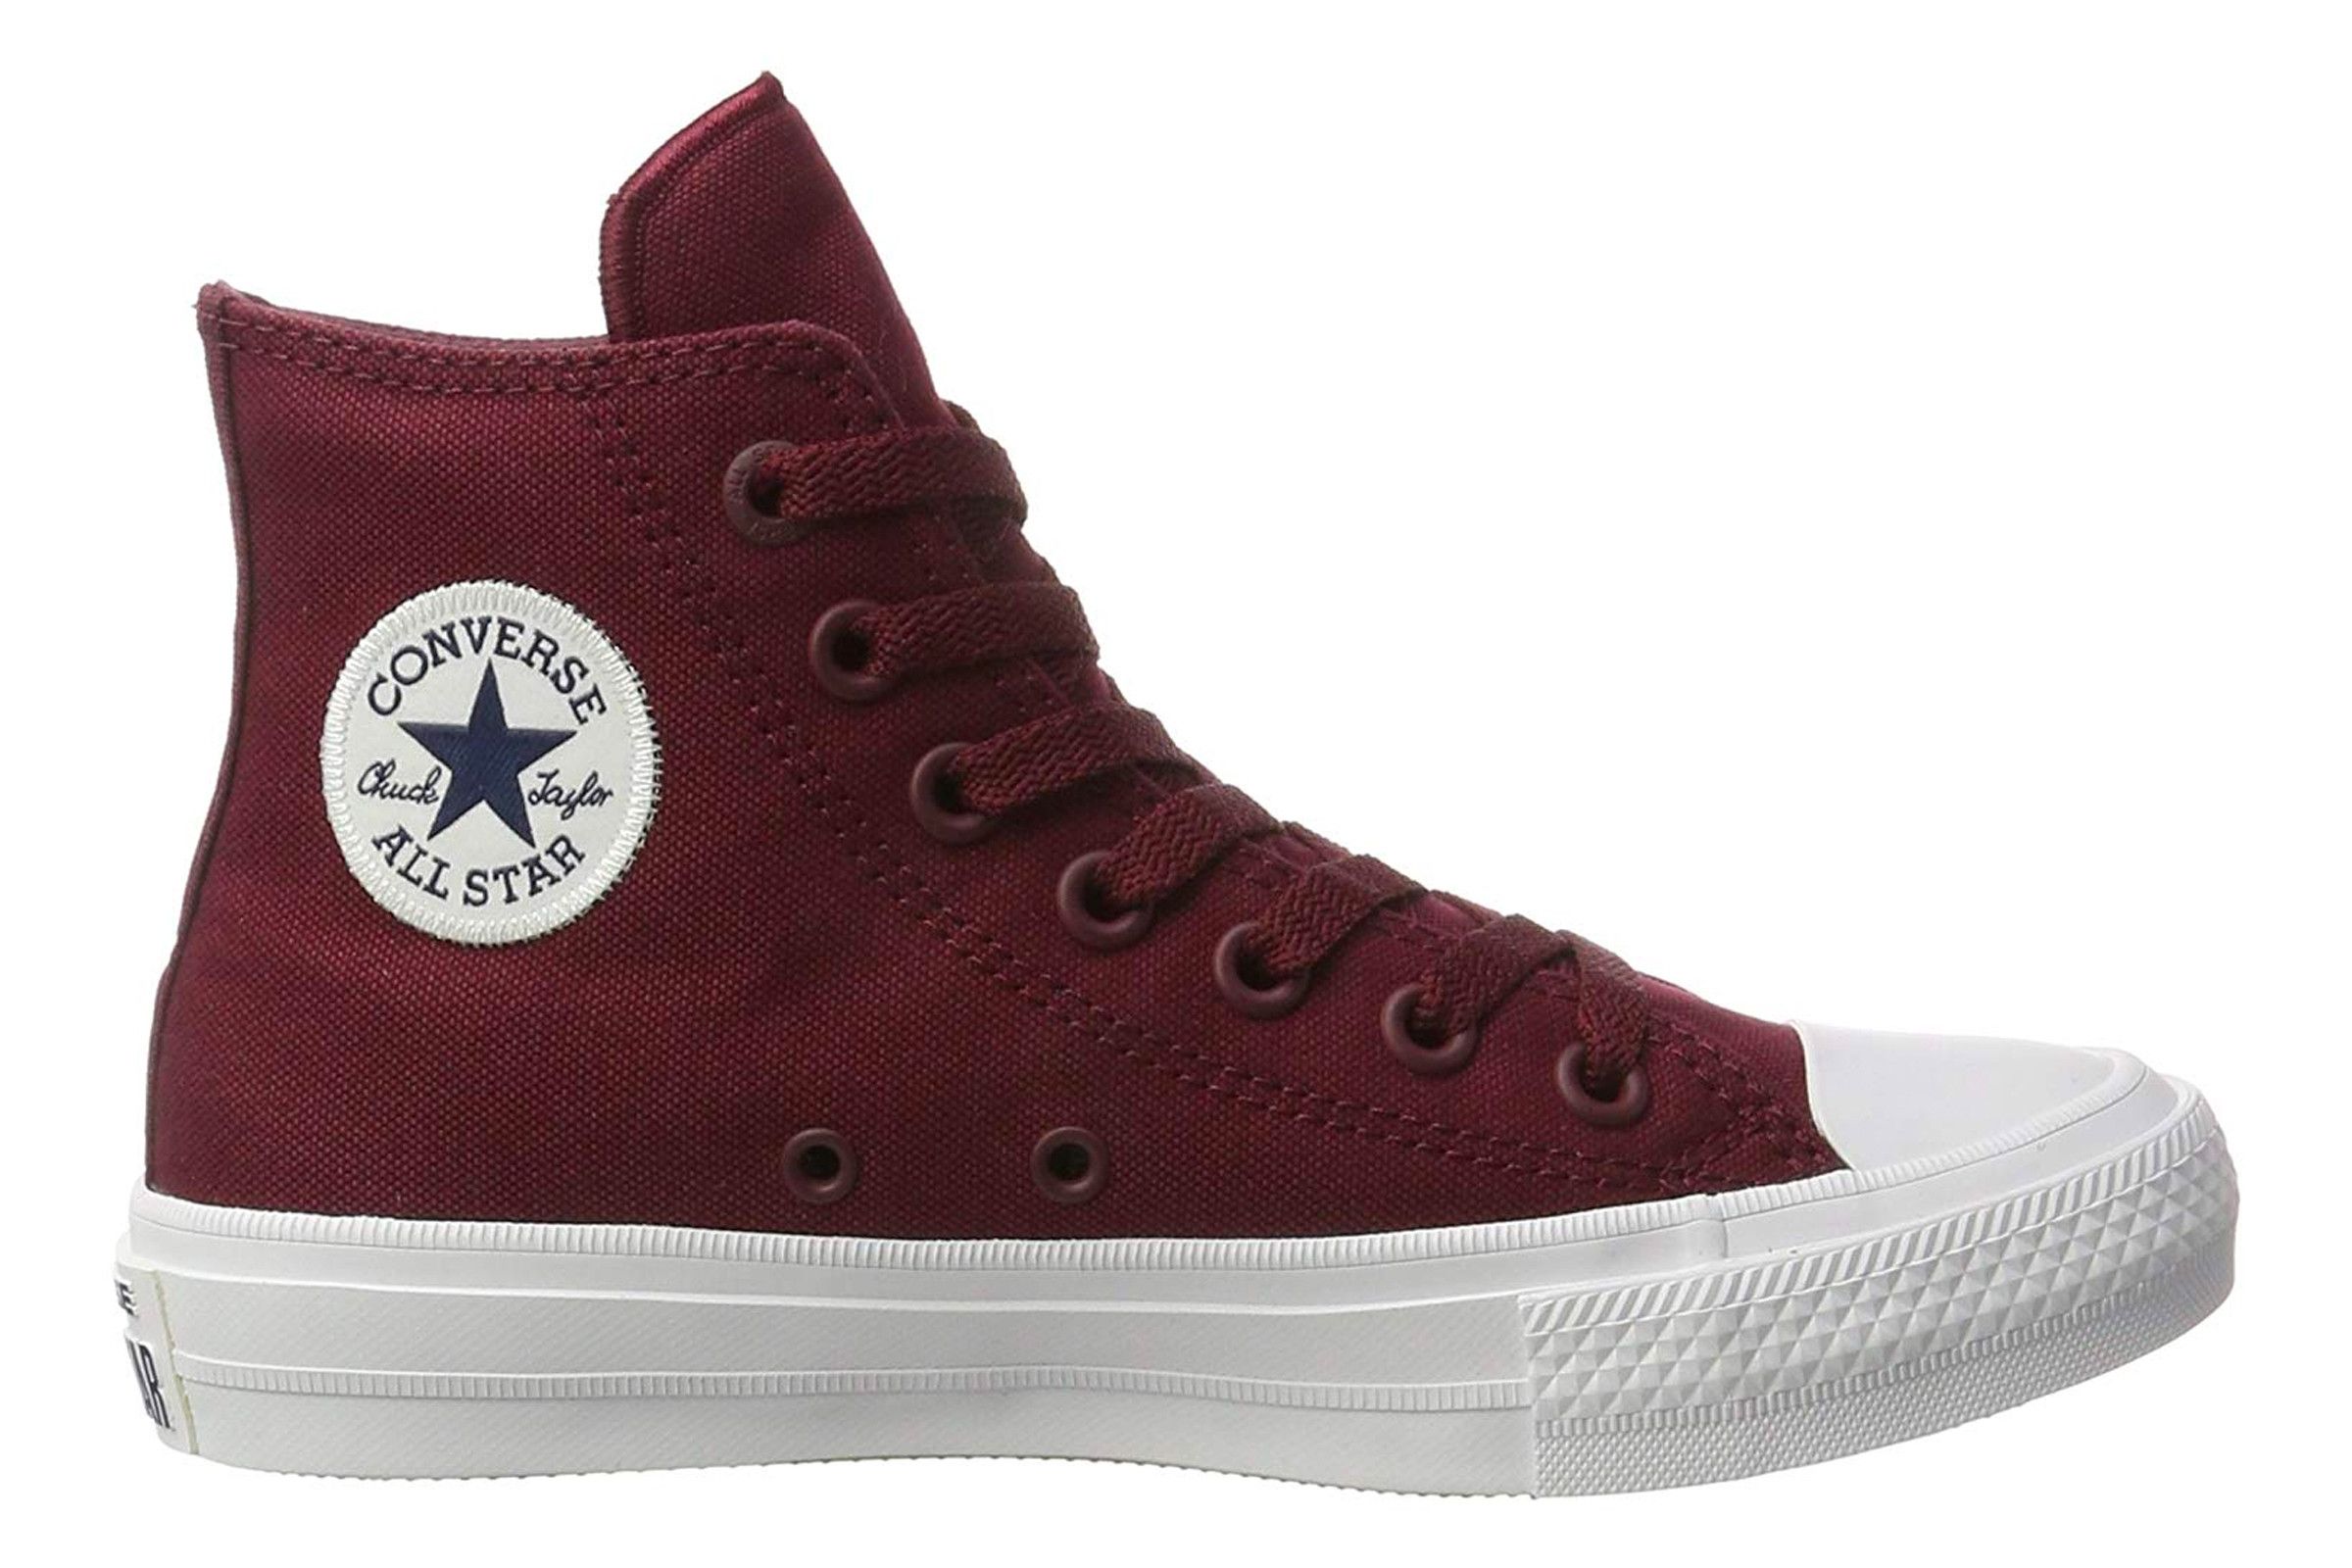 The Athletic History of the Converse Chuck Taylor: A Shoe for